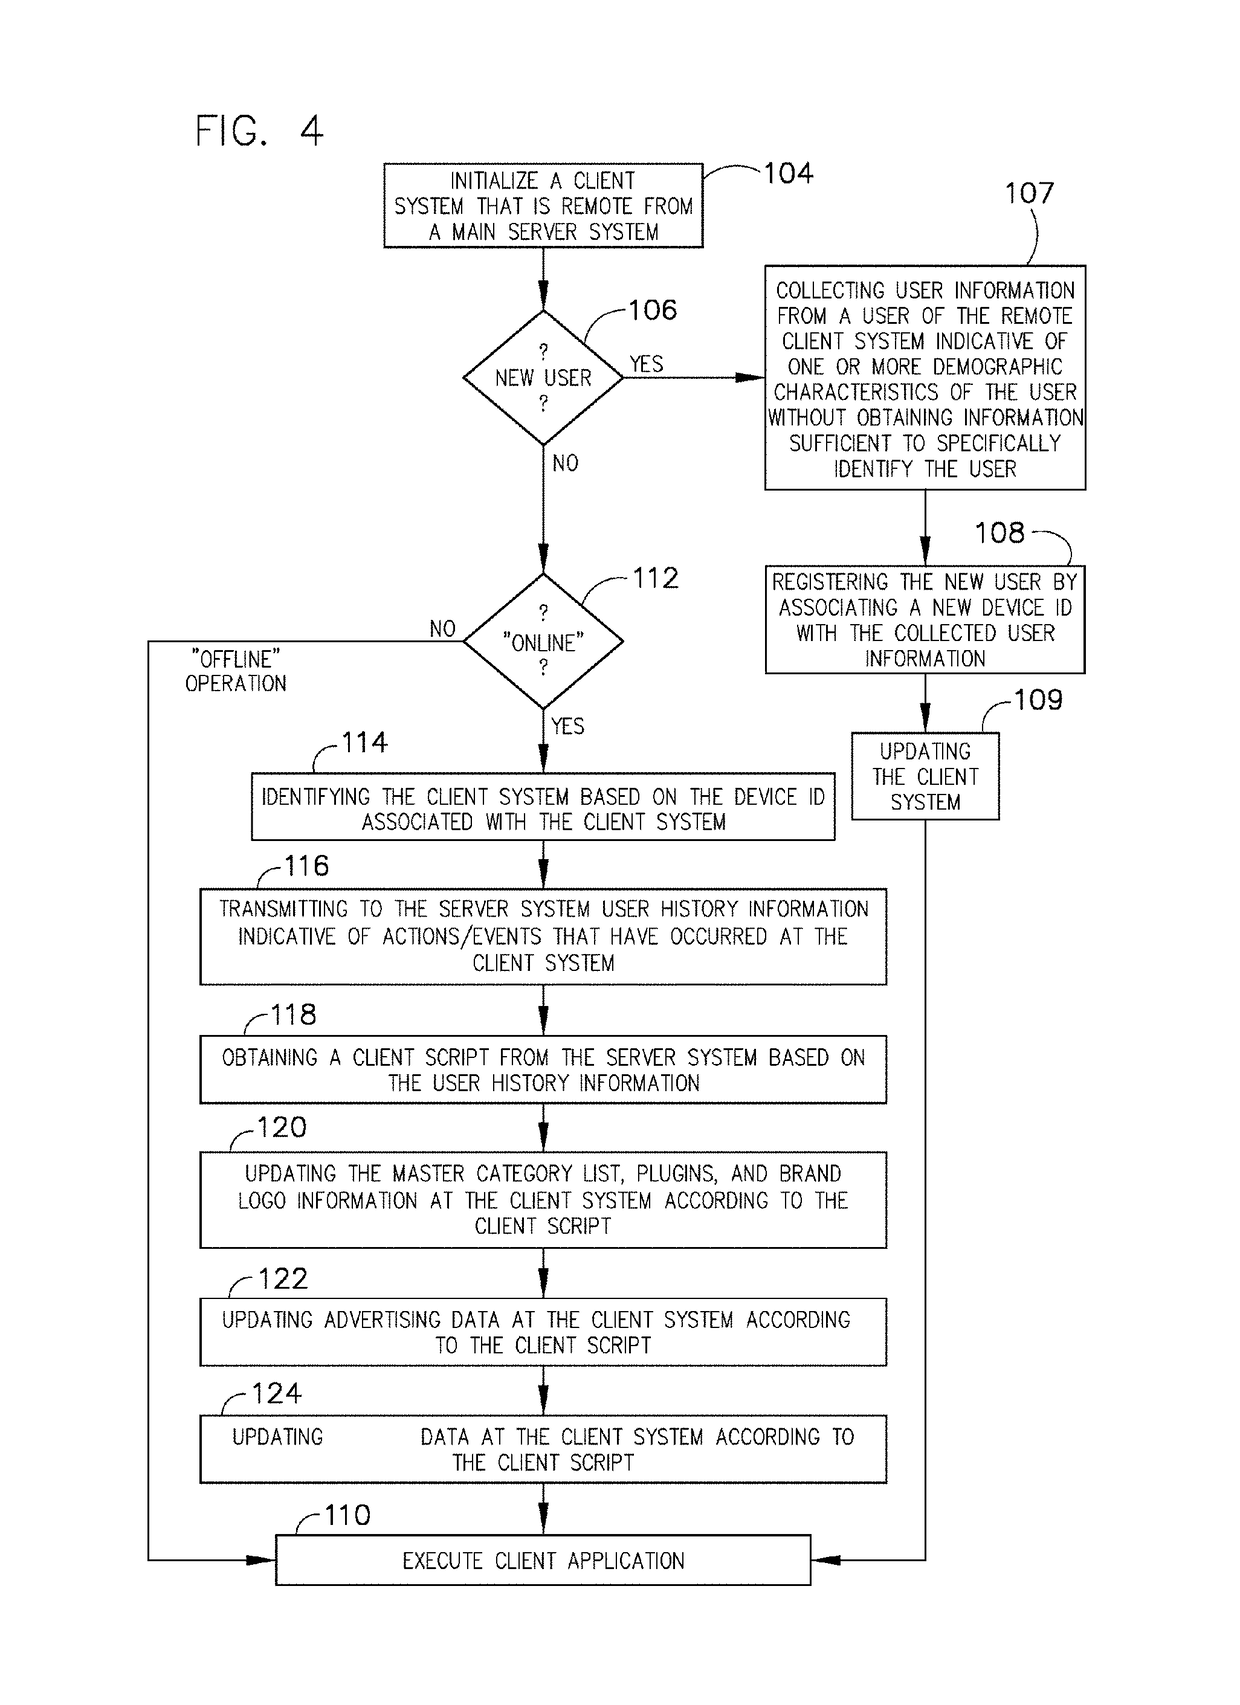 System and method for providing combination of online coupons, products or services with advertisements, geospatial mapping, related company or local information, and social networking